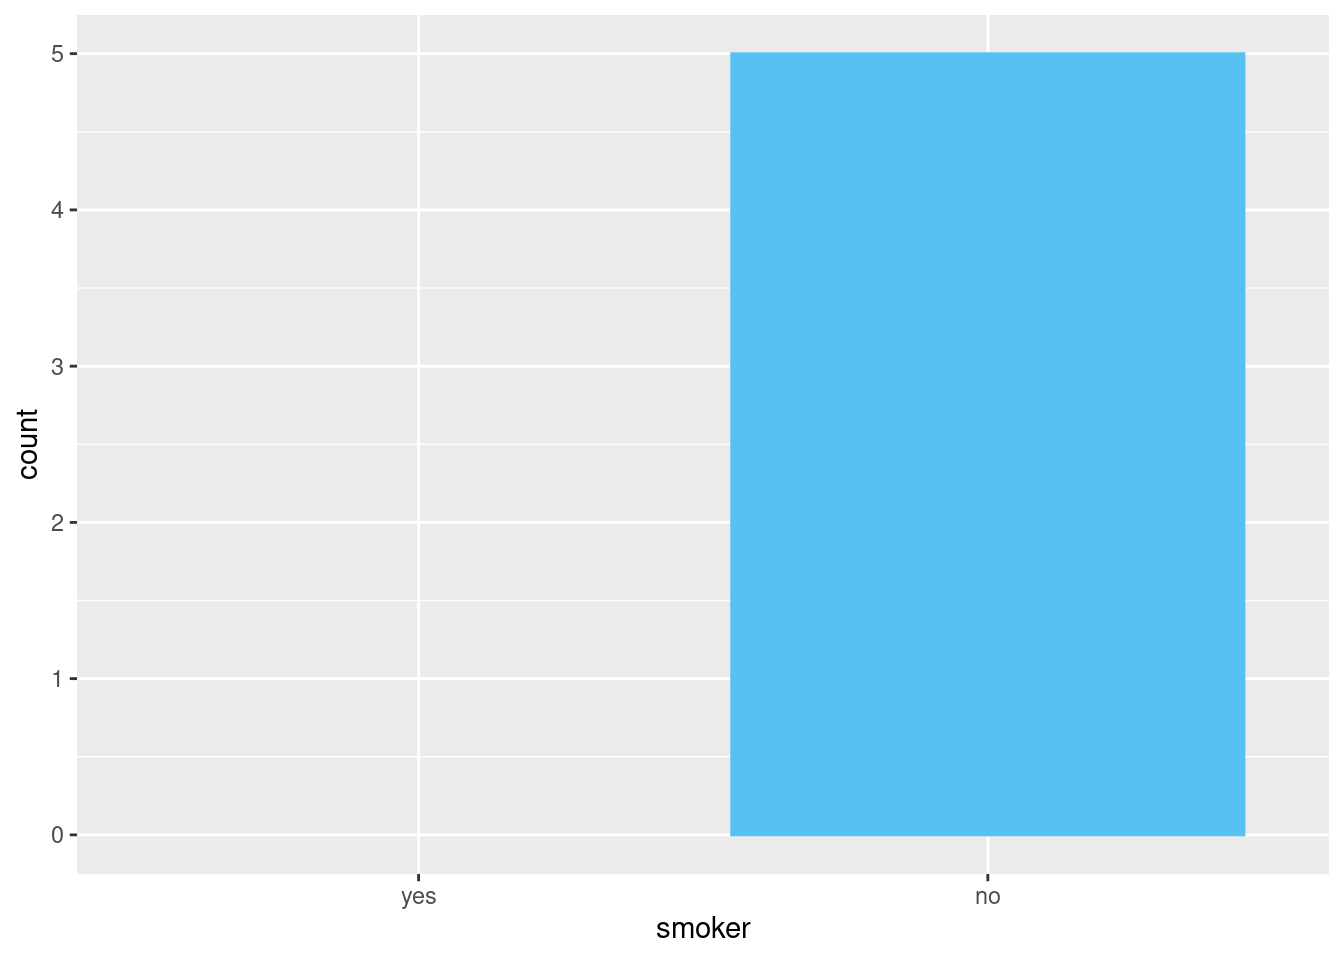 A barchart of the number of smoker and non-smokers. Thanks to the argument drop=FALSE in the scale_x_discrete function, the number of smoker is presented even though there are no smoker in the dataset.